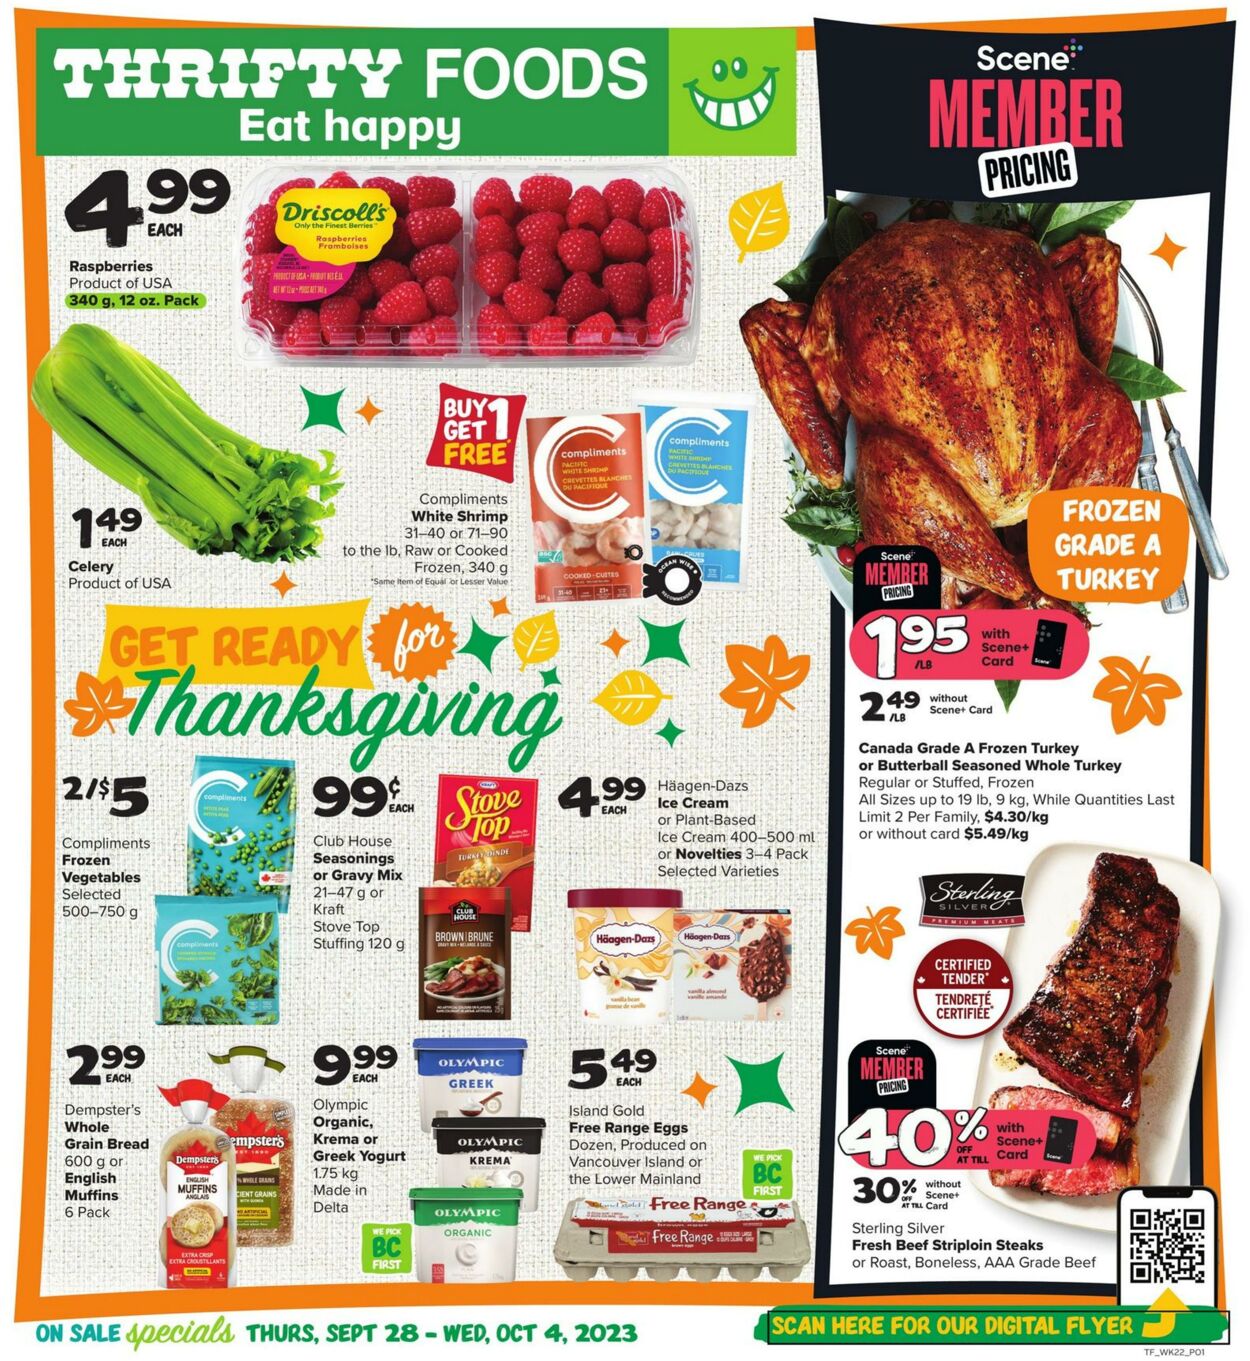 Thrifty grocery promotions